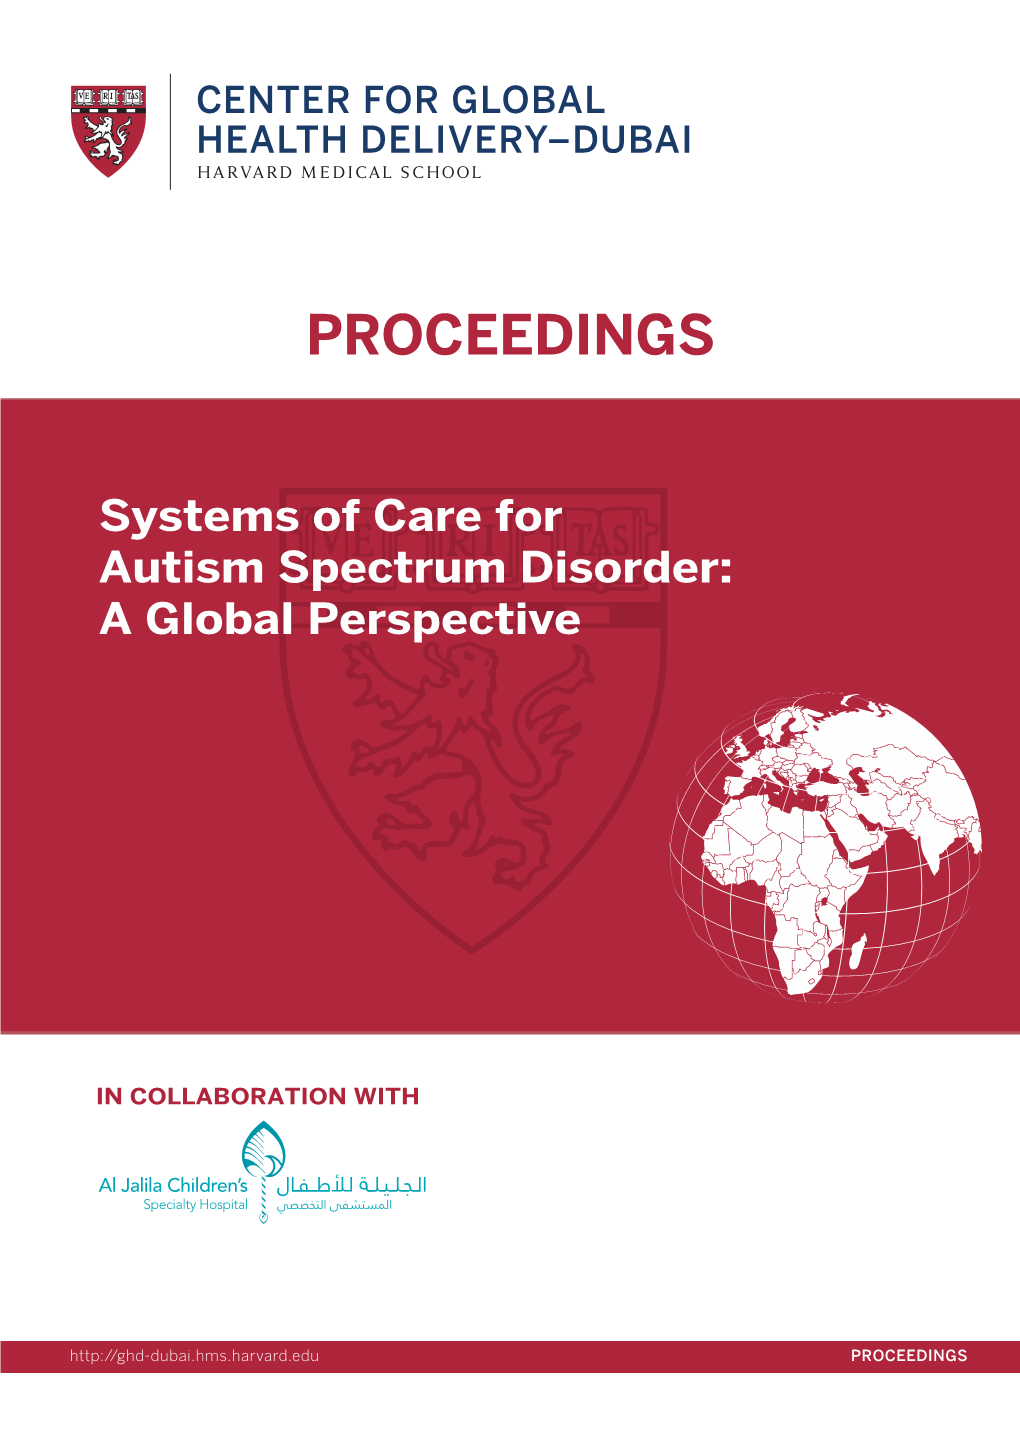 Systems of Care for Autism Spectrum Disorder: a Global Perspective